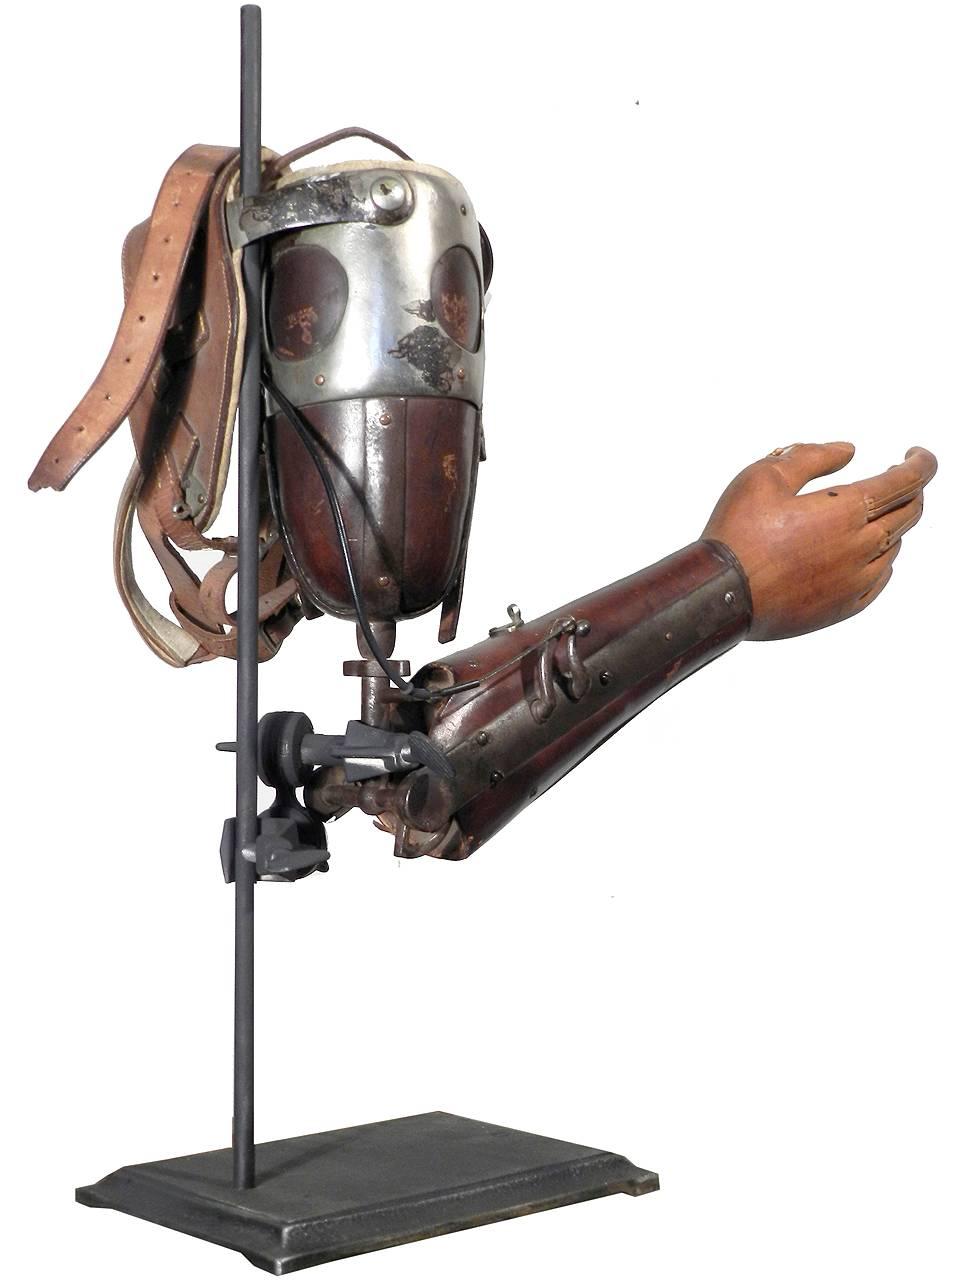 This is a very early and complex prosthetic arm. Made by Anderson & Whitelaw Ltd. Birmingham England C. 1914-1918. It has an 